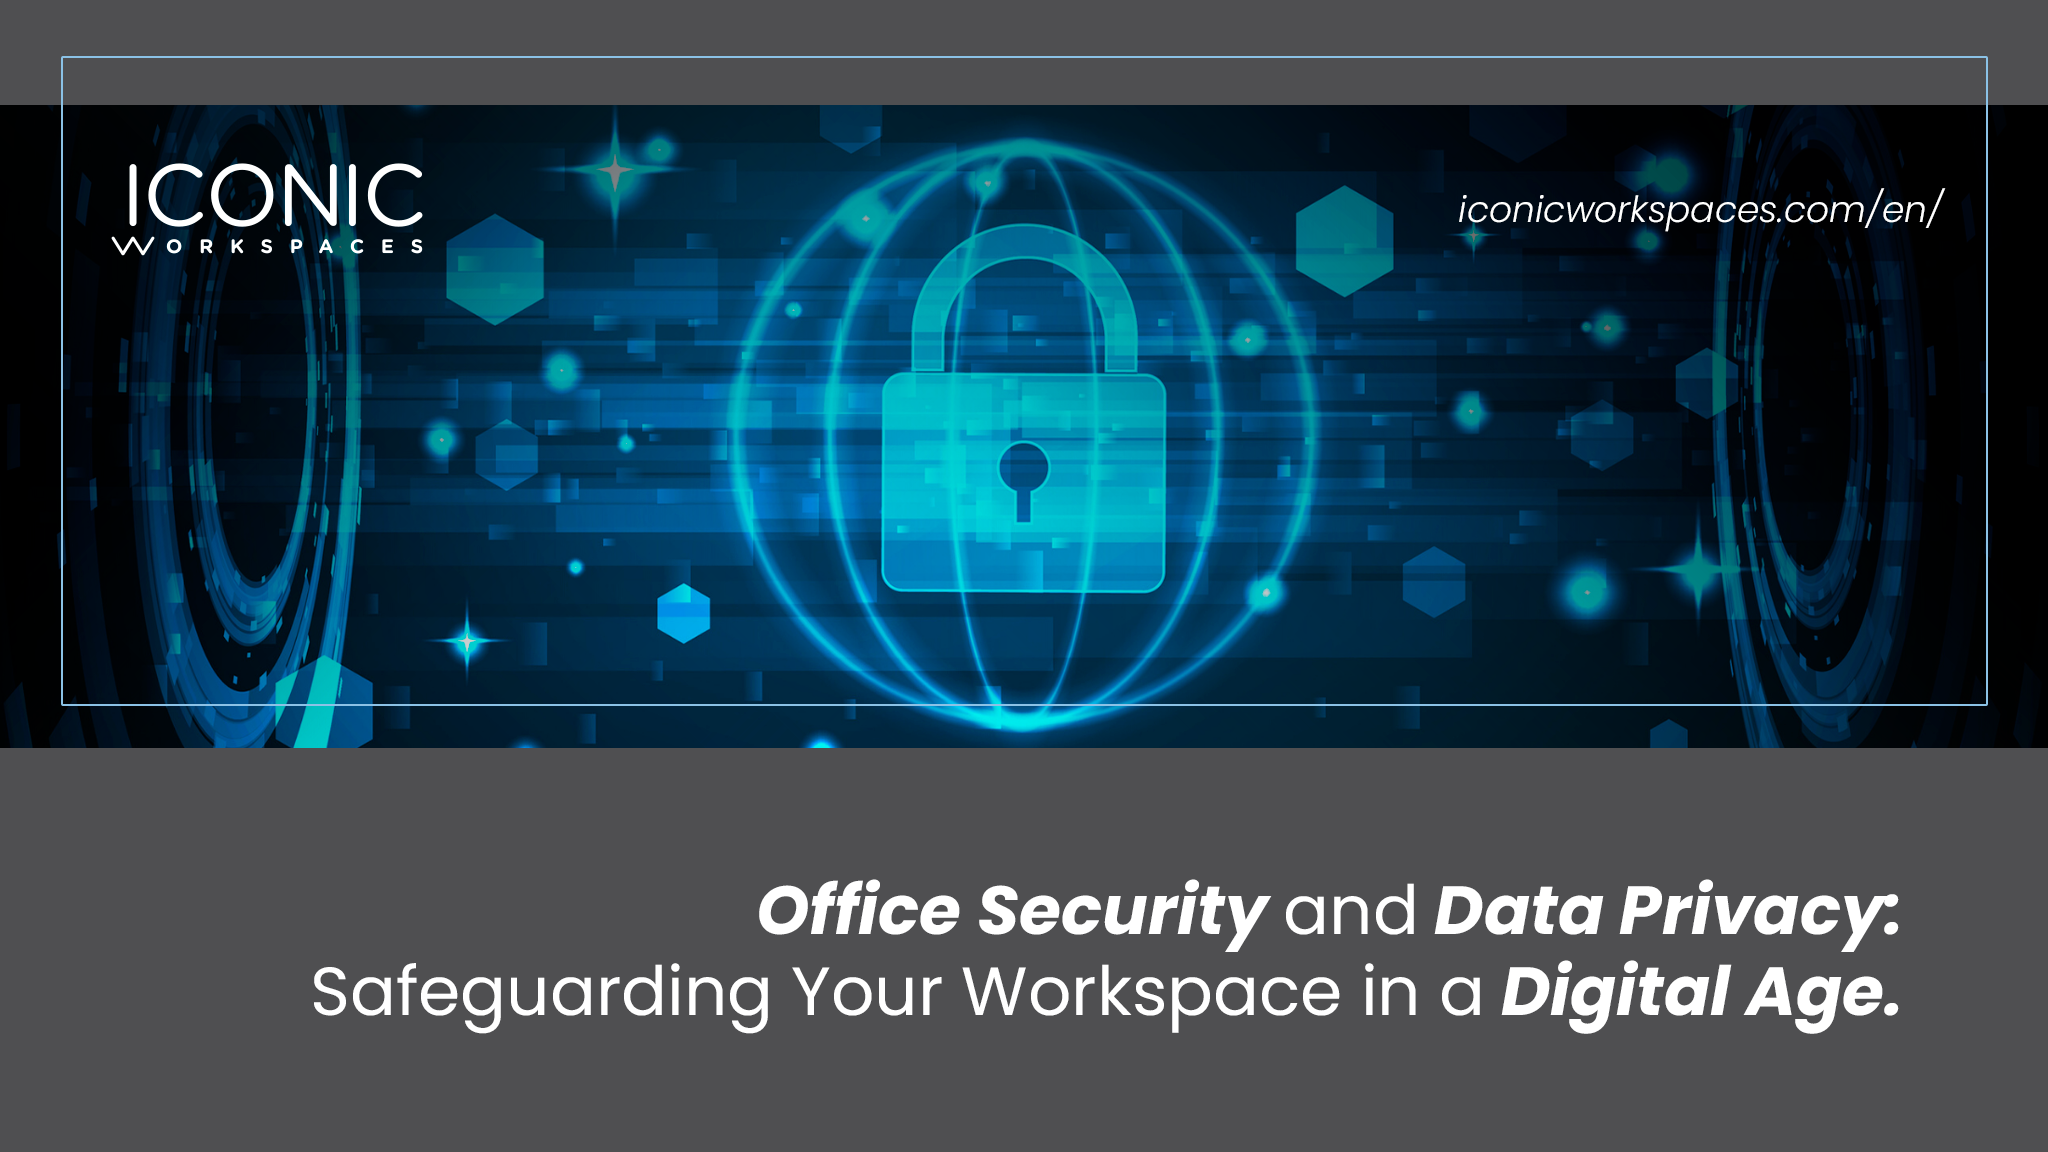 Office Security and Data Privacy: Safeguarding Your Workspace in a Digital Age